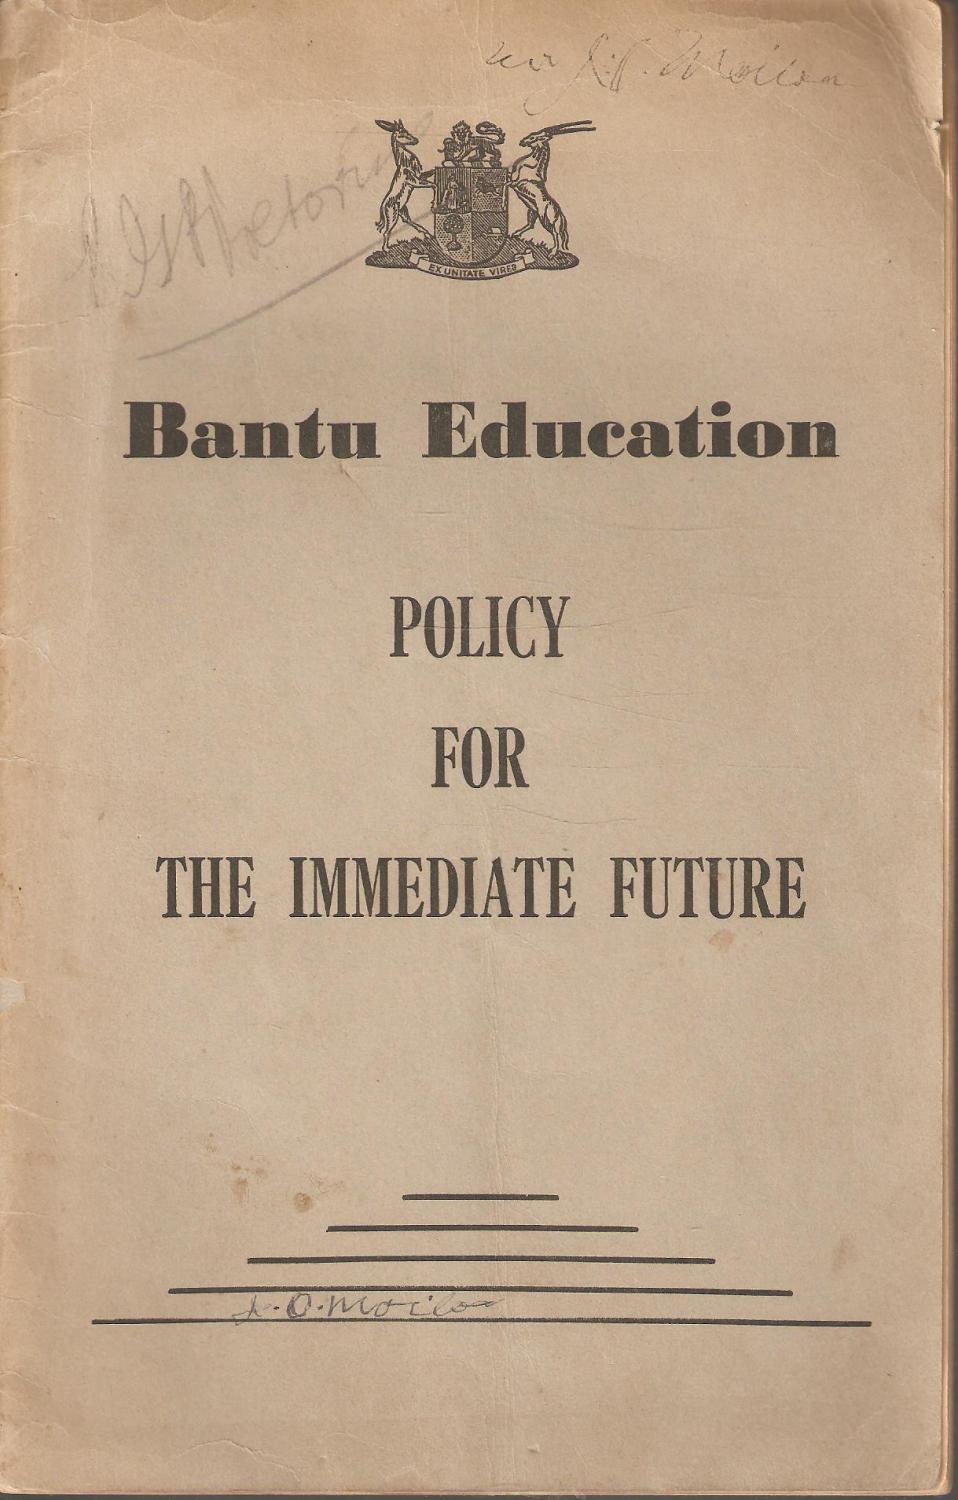 write a report on the bantu education